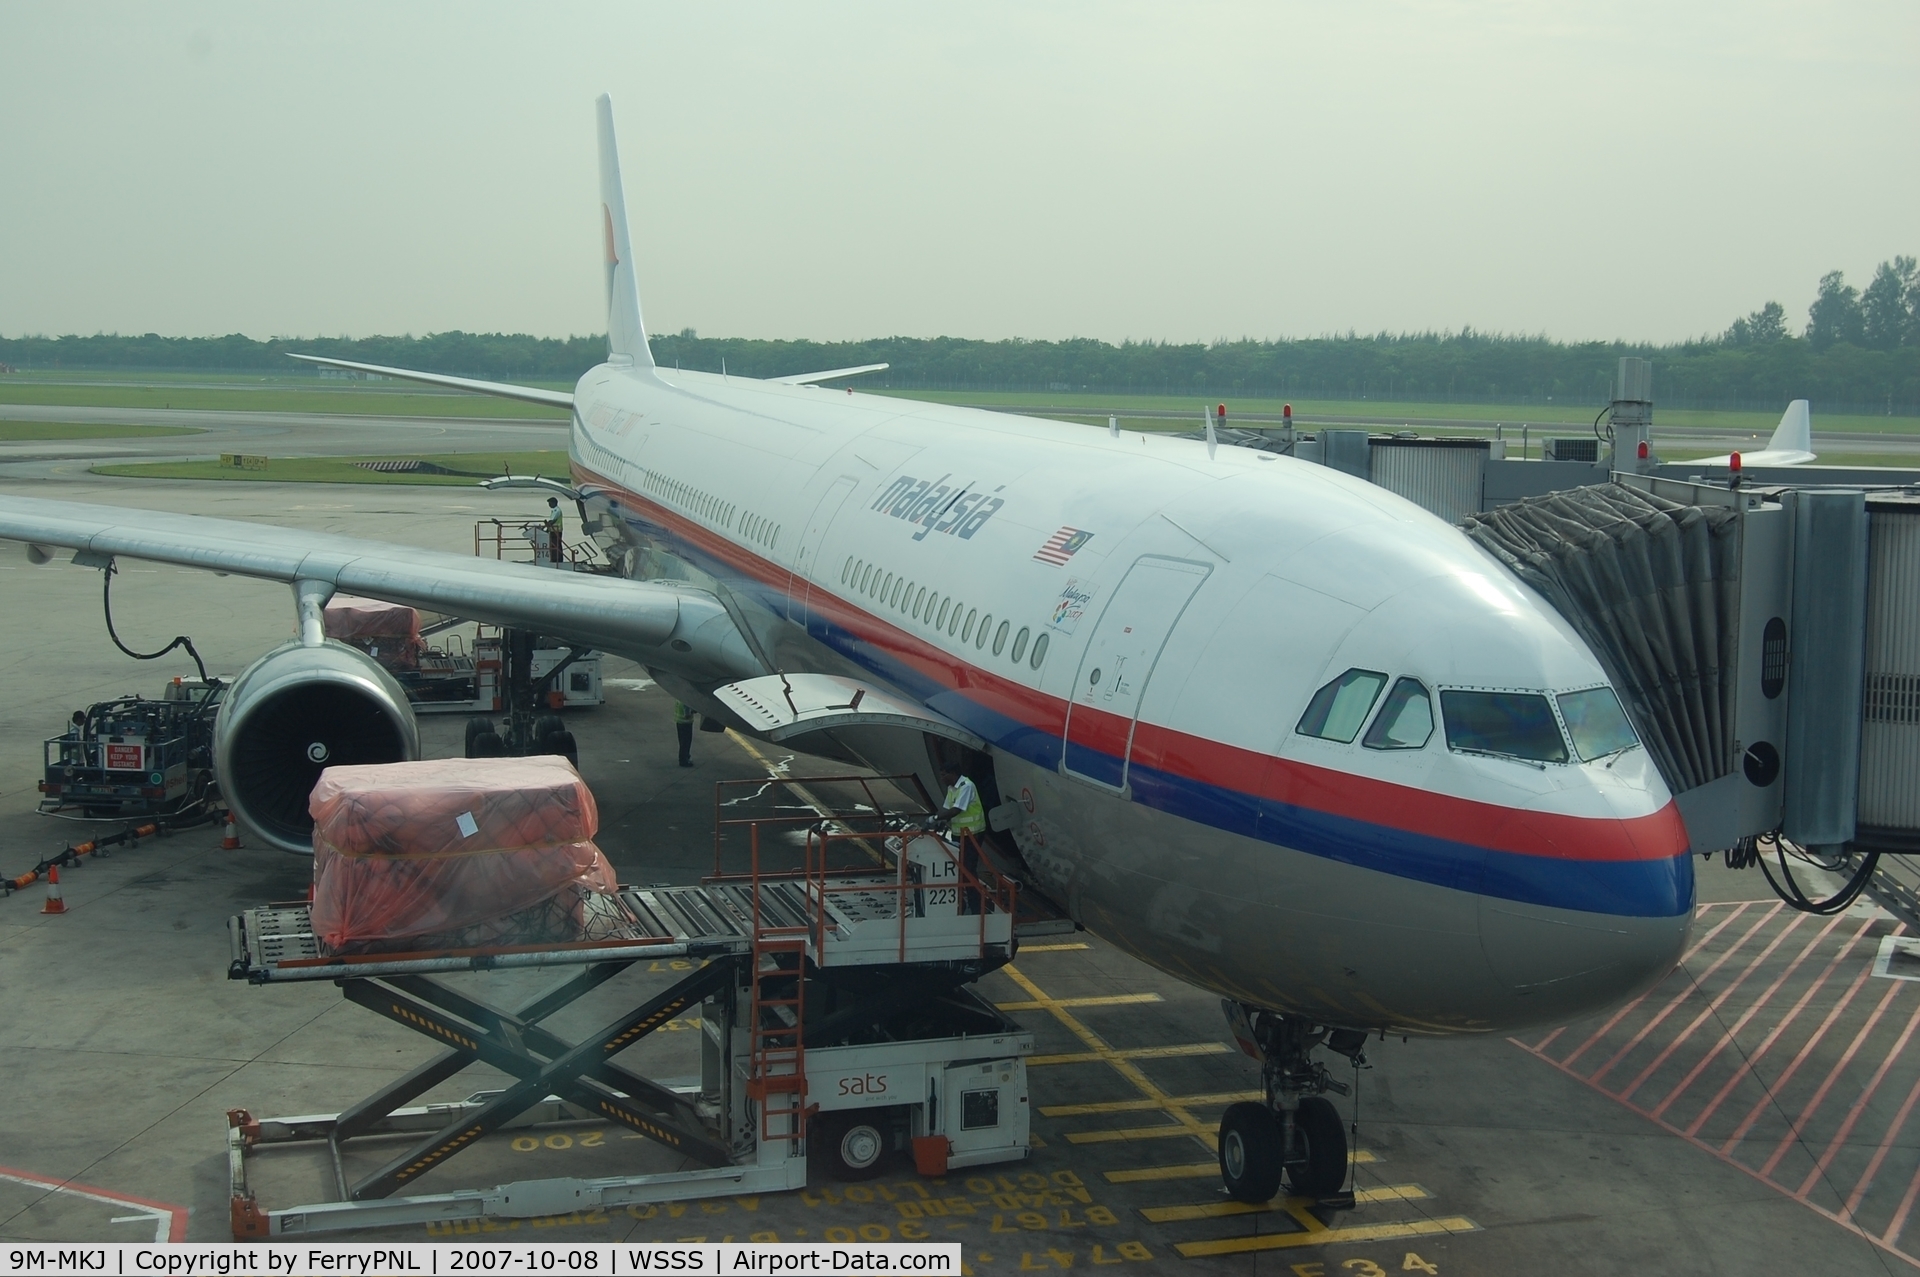 9M-MKJ, 1995 Airbus A330-322 C/N 119, Malaysian A333 at its gate in SIN.